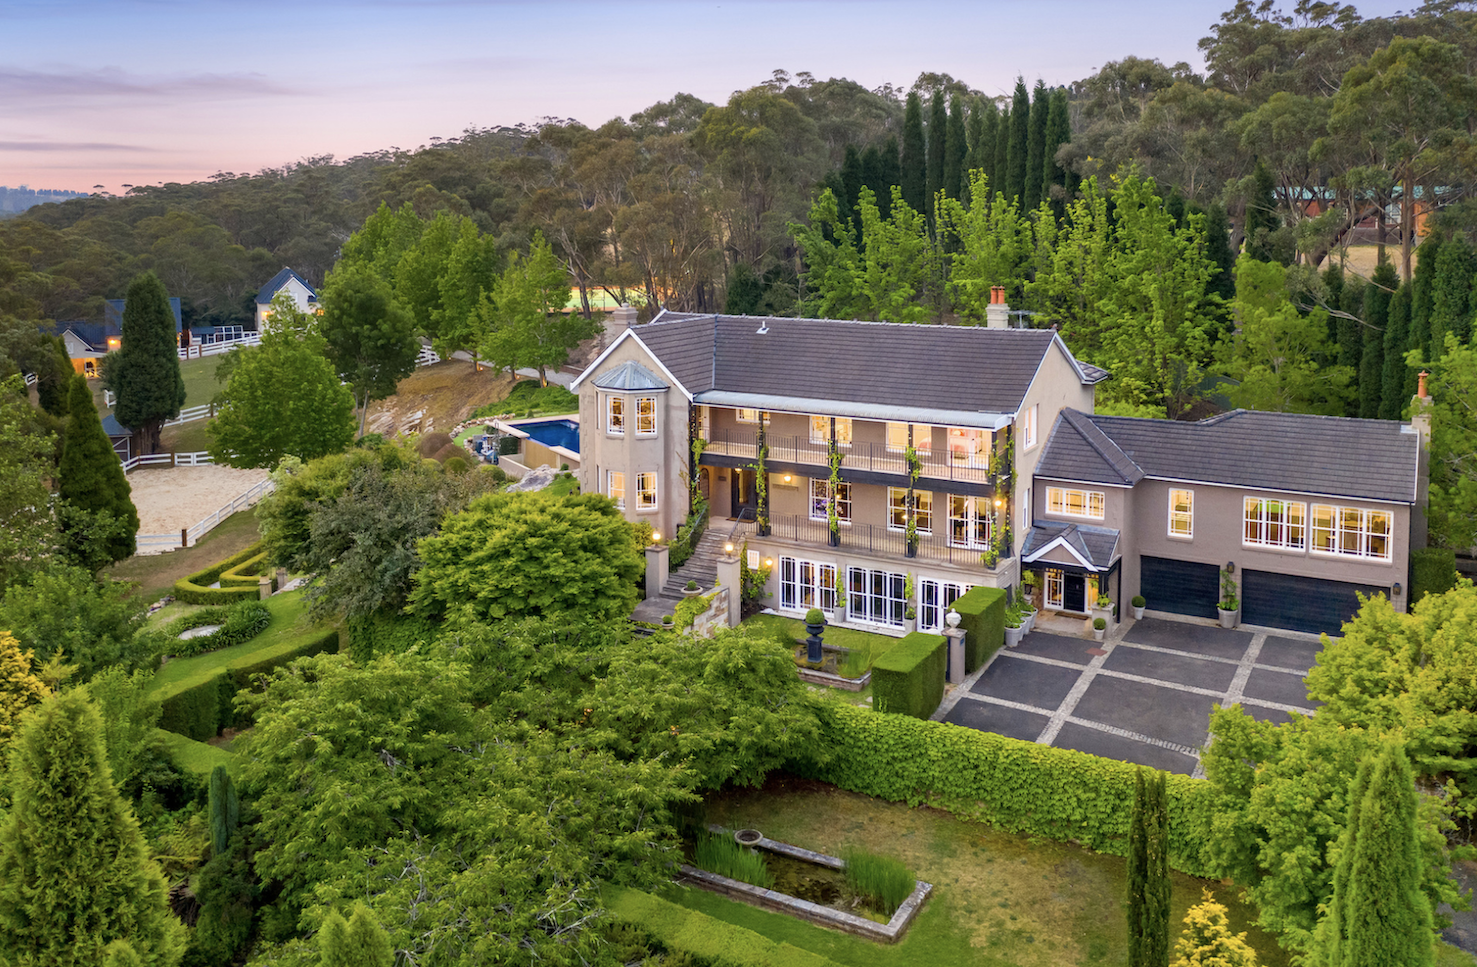 Grand manor house outside beautiful Bowral takes you far away from it all